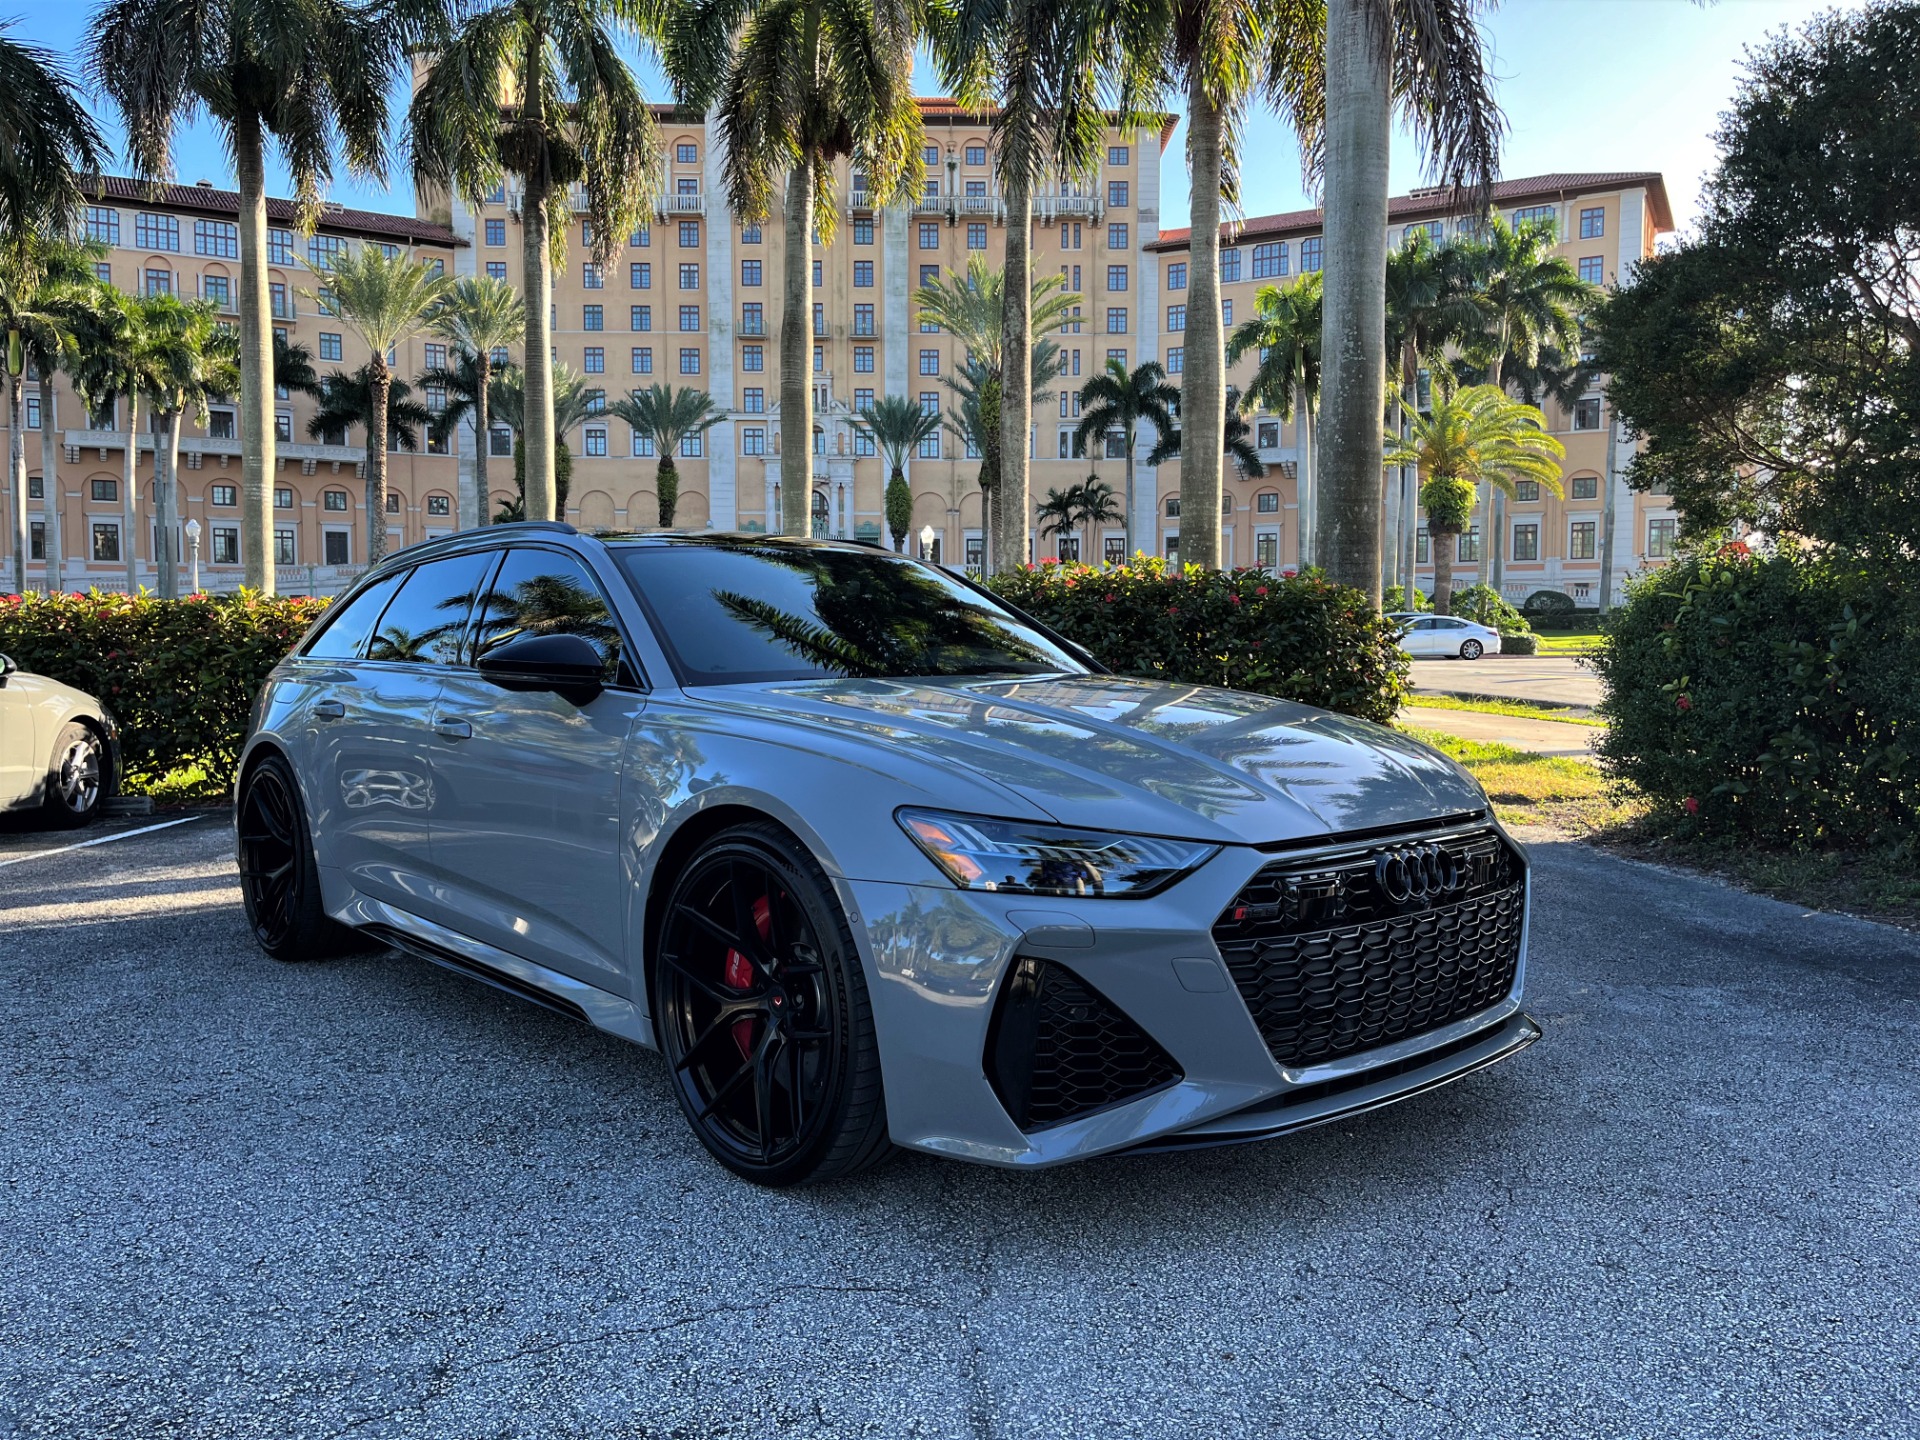 Used 2021 Audi RS 6 Avant 4.0T quattro Avant for sale $122,850 at The Gables Sports Cars in Miami FL 33146 1